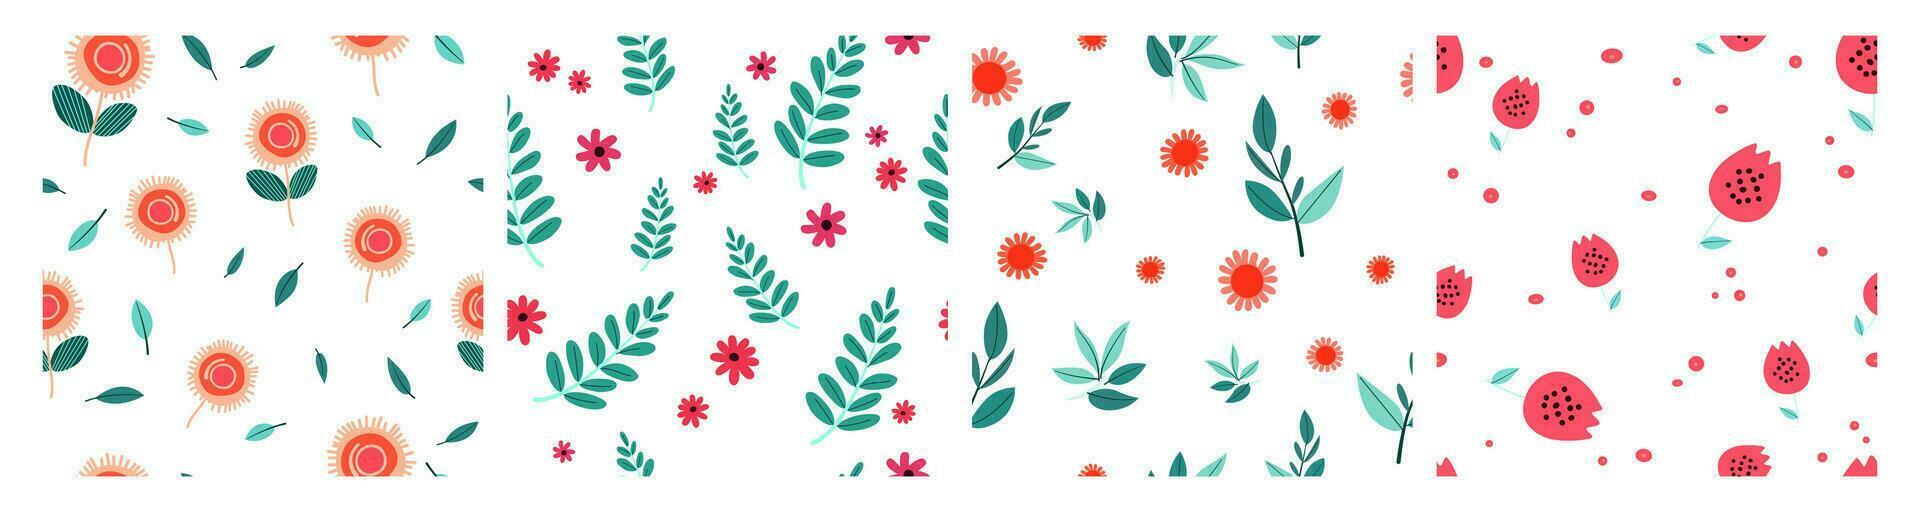 set of seamless floral patterns with flowers and leaves, exotic design for cover paper and fabric vector illustration